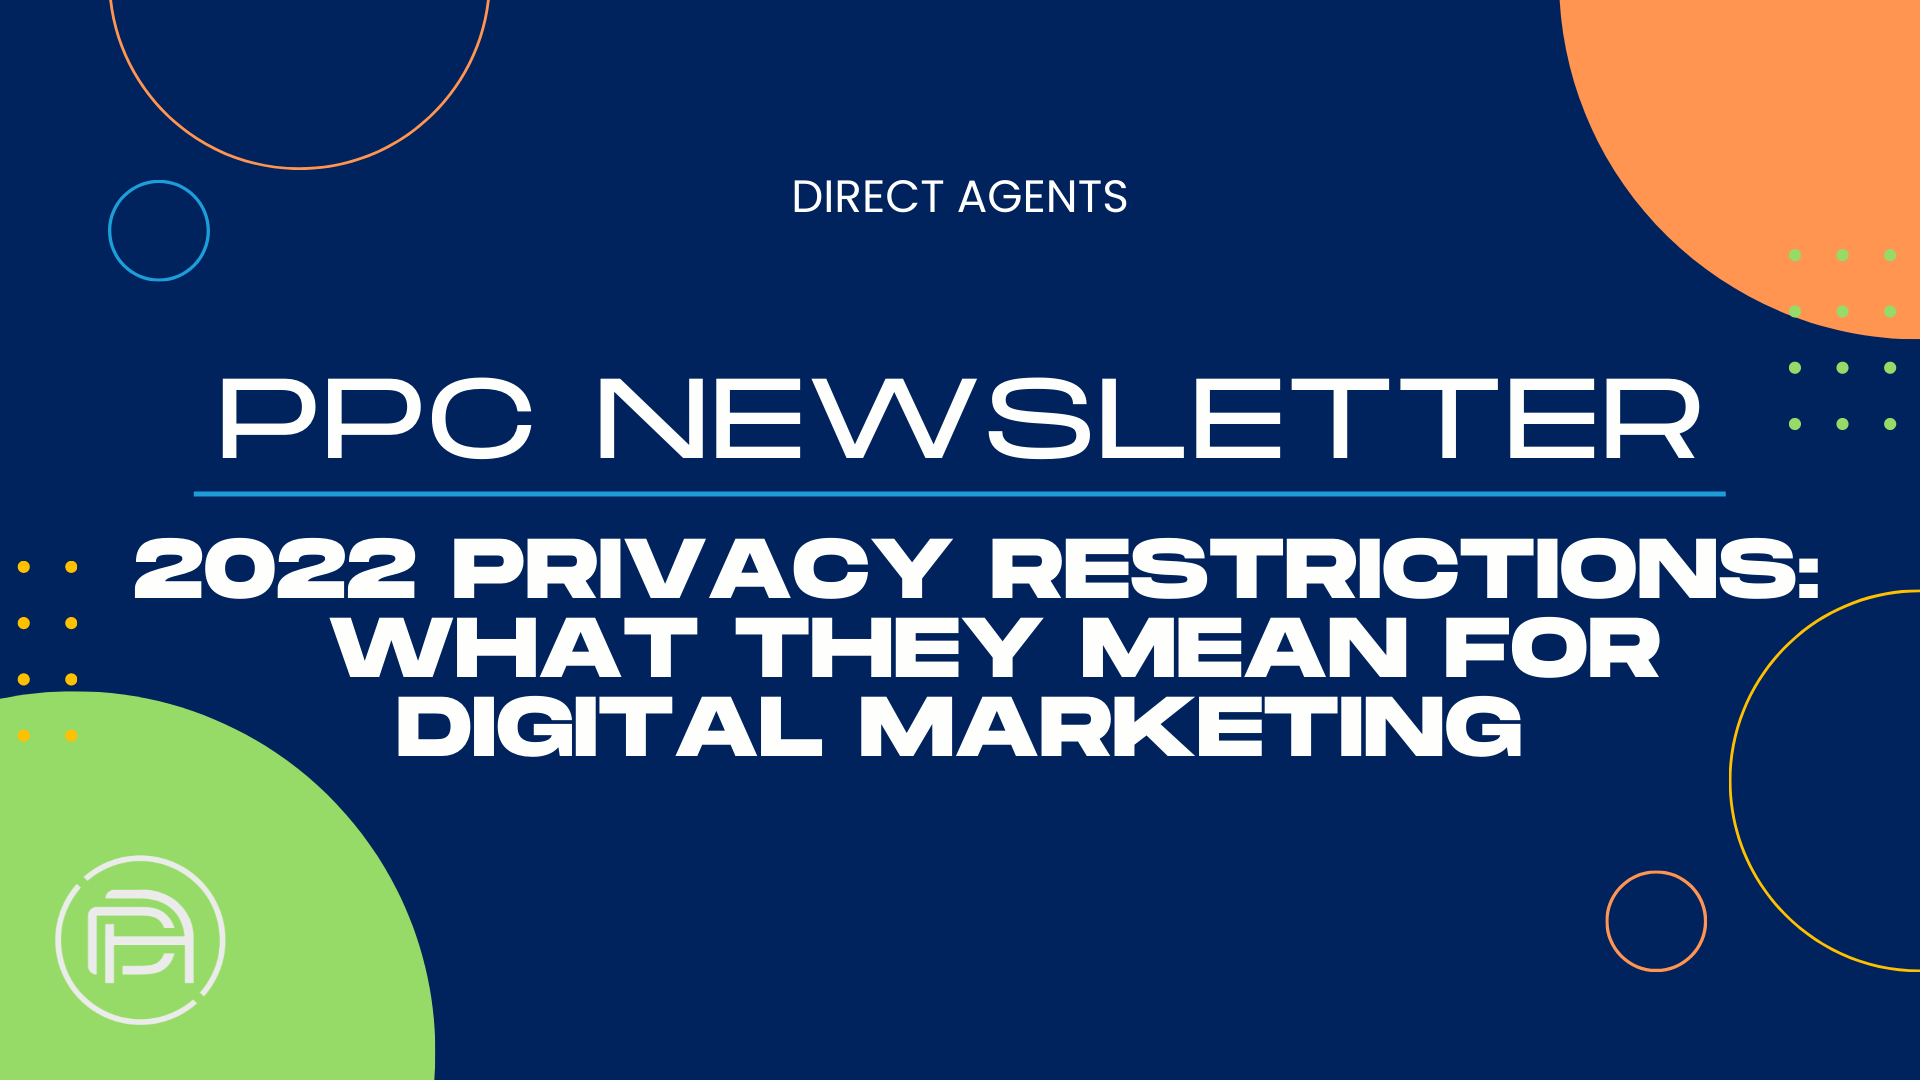 Privacy Restrictions For 2022 & What They Mean For Digital Marketing